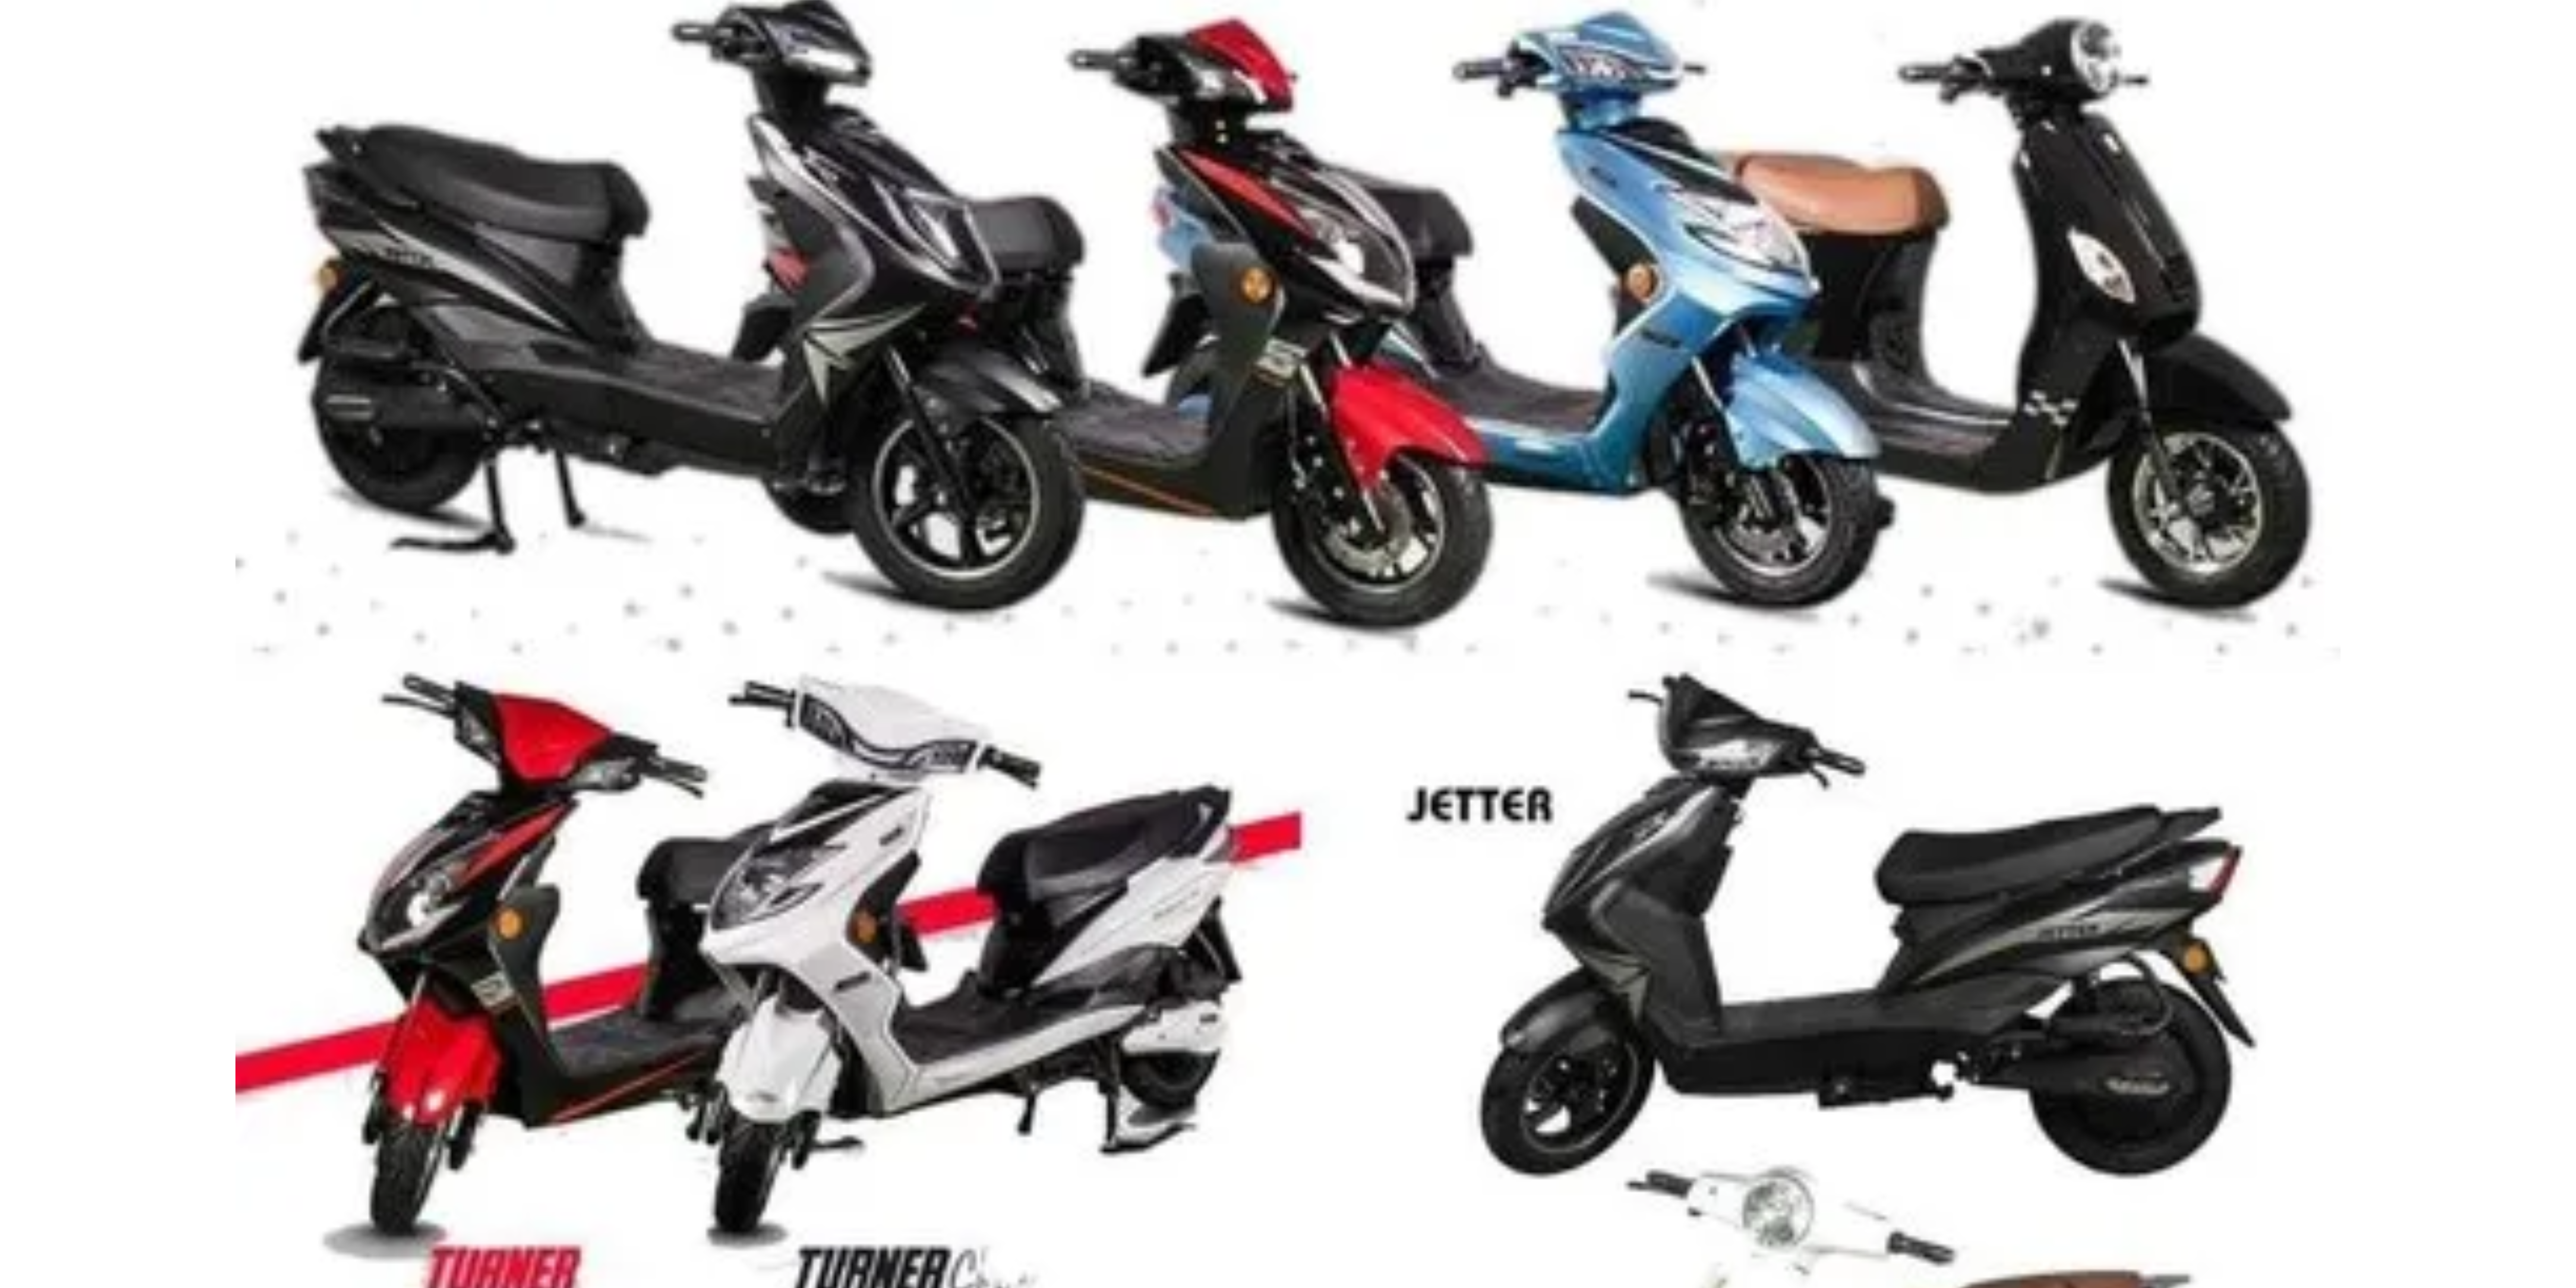 TNR Electric Scooters